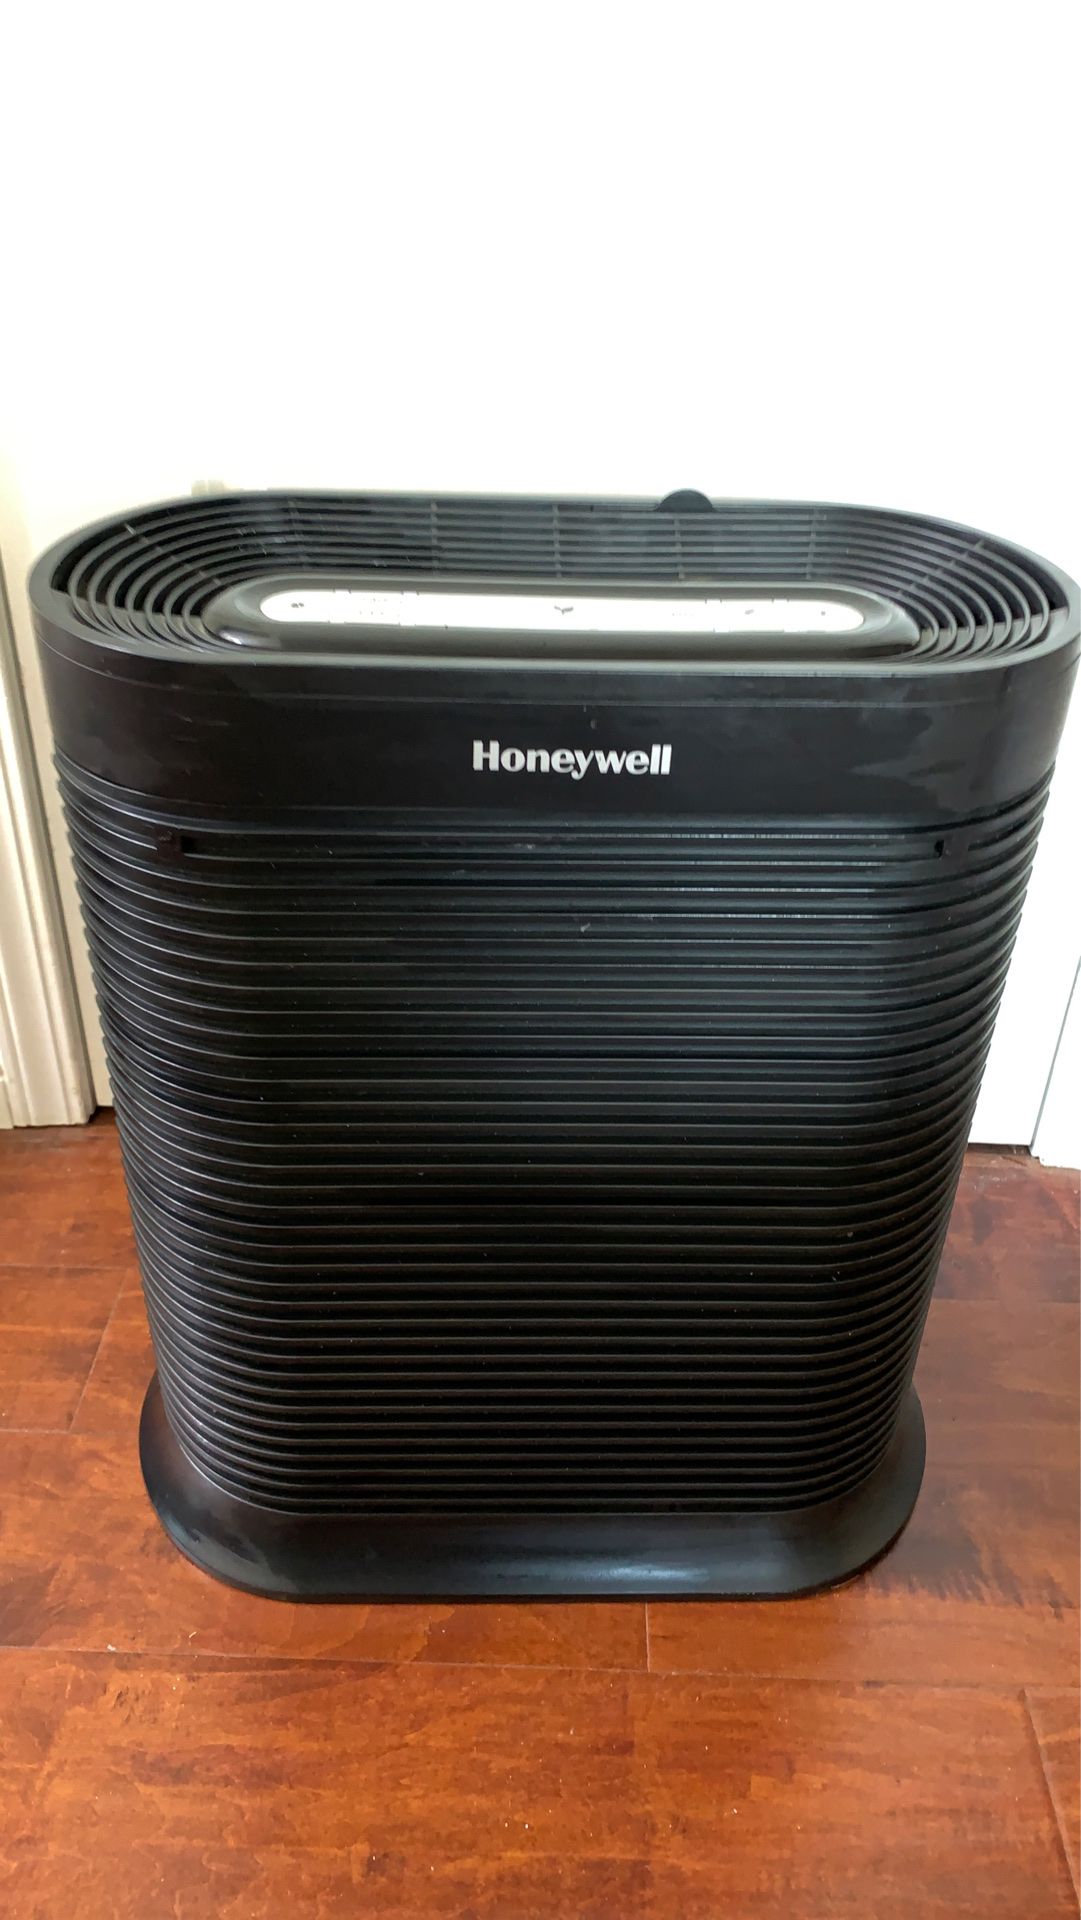 Honeywell HPA300 True HEPA Air Purifier, Extra-Large Room, Black with filters